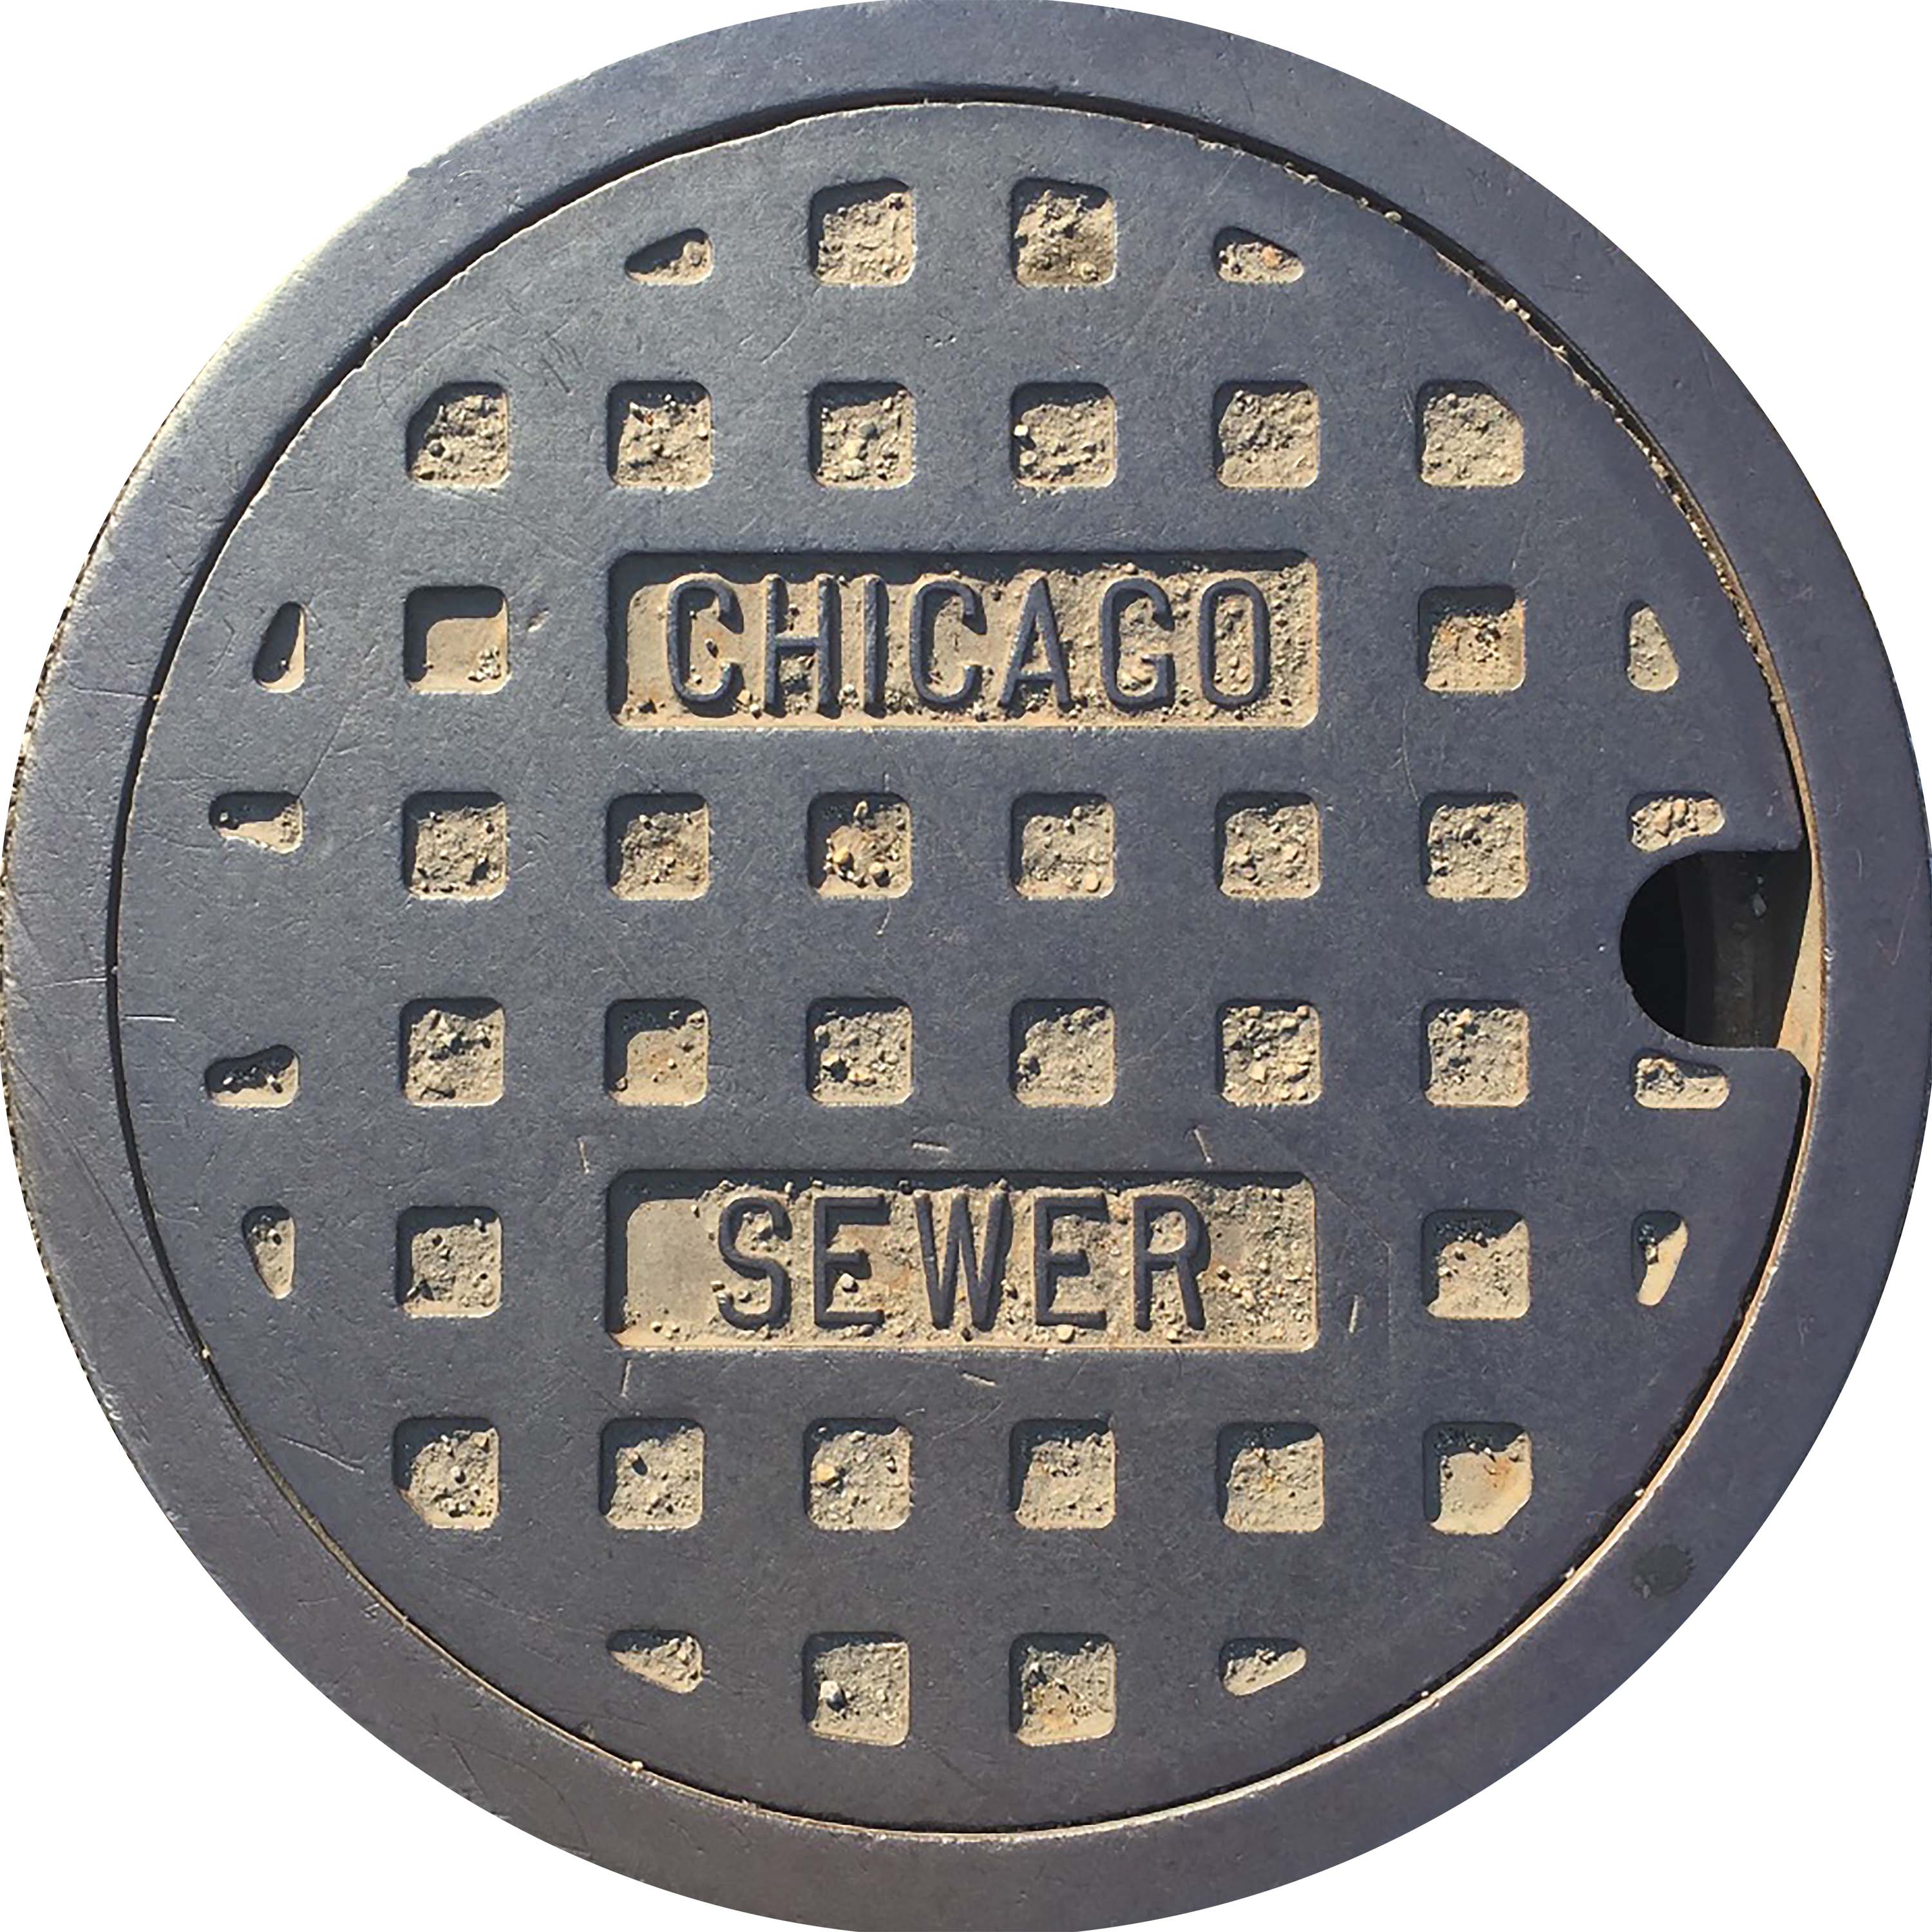 PROJECT MIDWEST - Chicago, IL - Sewer Cover Doormat - Vernakular Photo  Designs